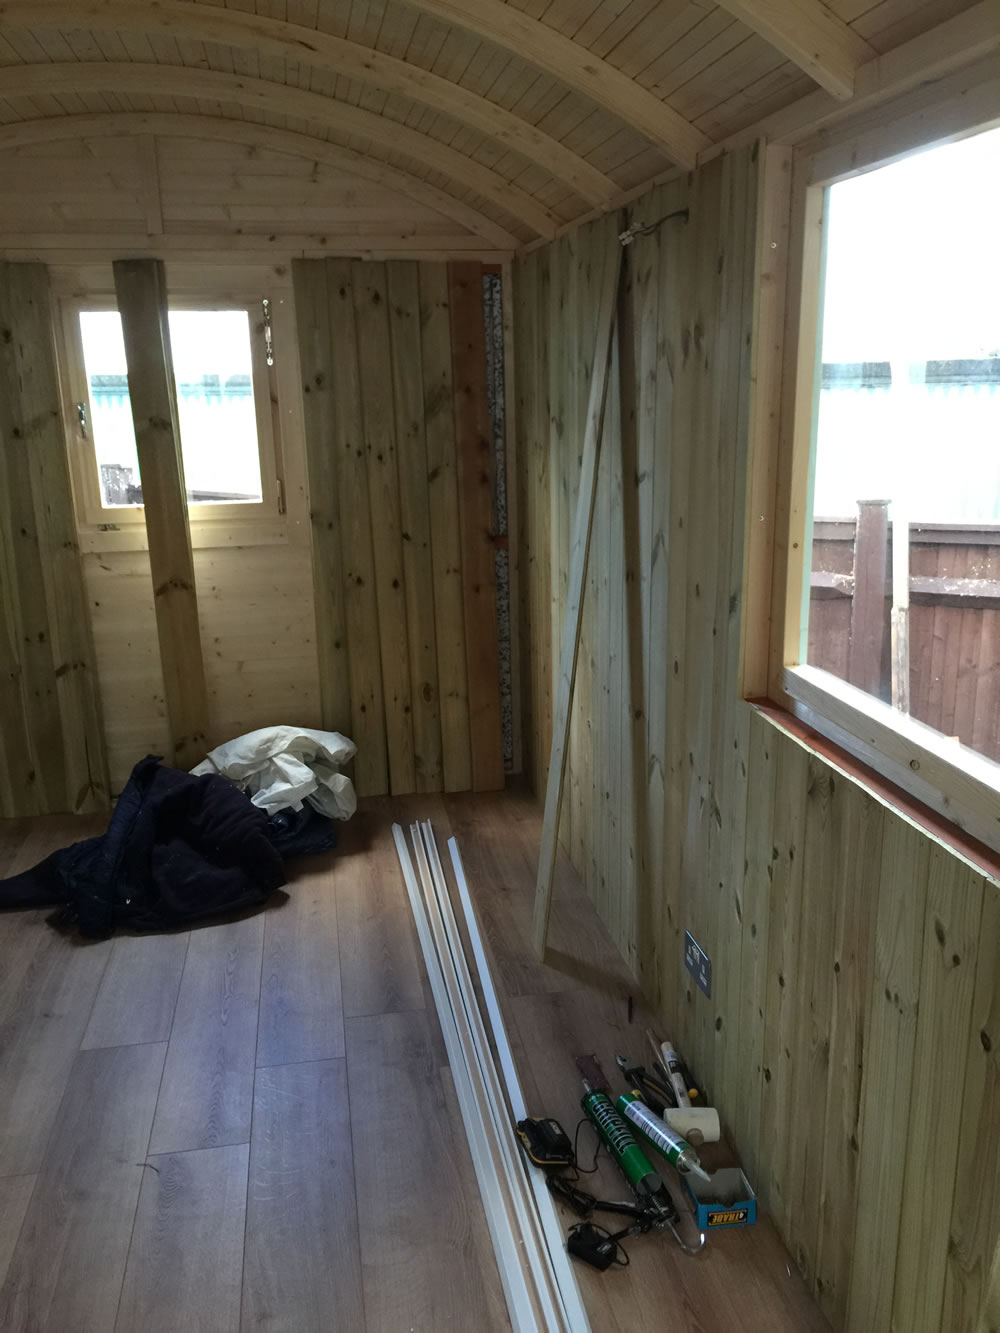 Tongue and groove timber lining - we can also supply lining boards of 18mm and 27mm if asked.